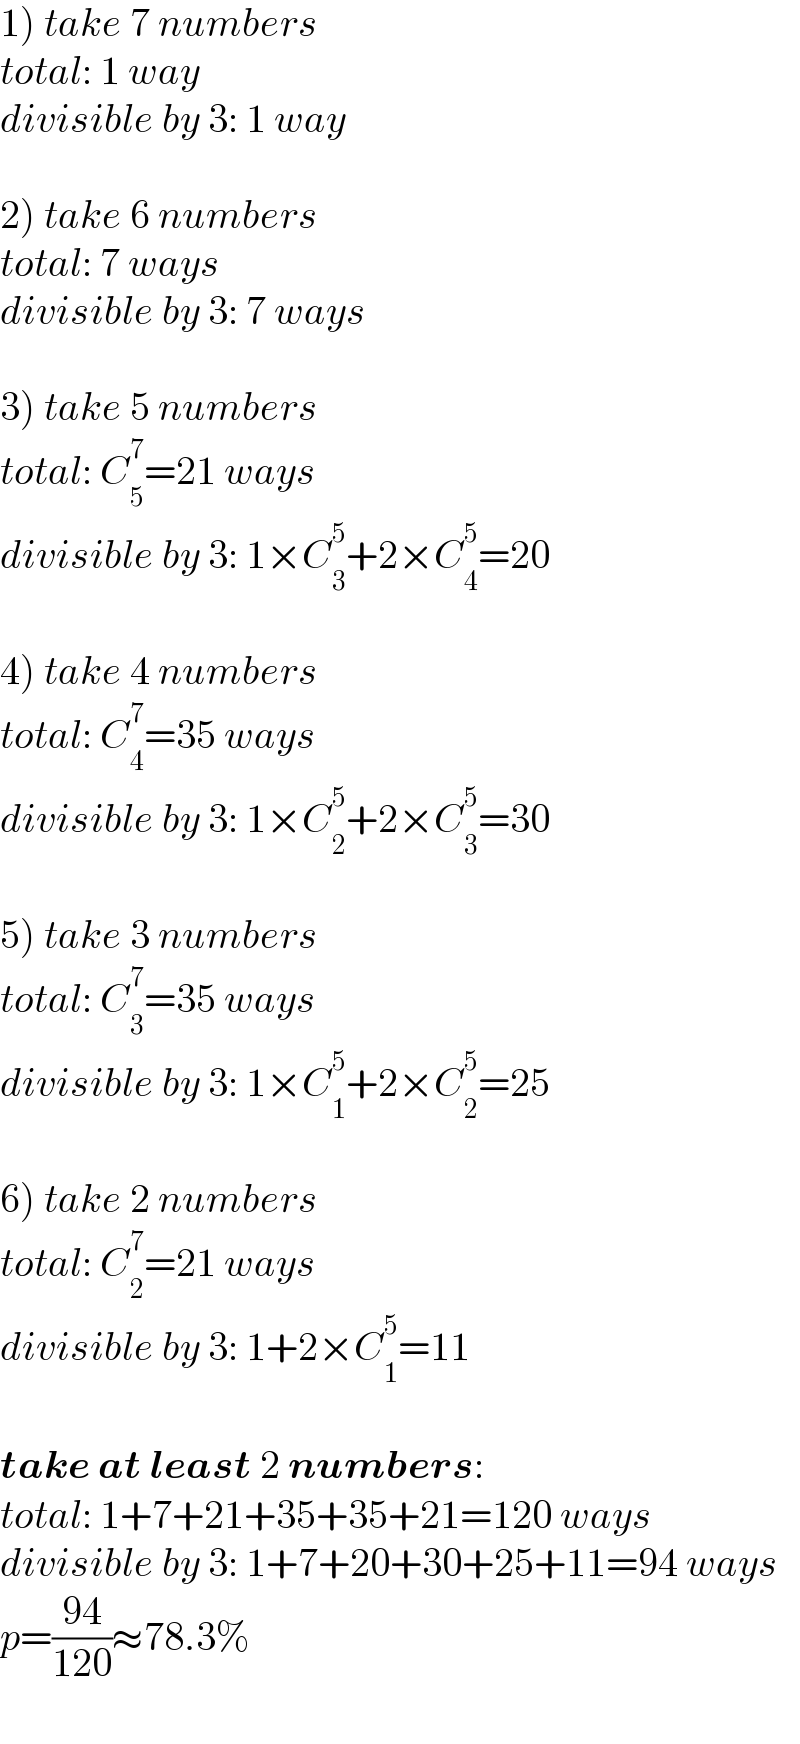 1) take 7 numbers  total: 1 way  divisible by 3: 1 way    2) take 6 numbers  total: 7 ways  divisible by 3: 7 ways    3) take 5 numbers  total: C_5 ^7 =21 ways  divisible by 3: 1×C_3 ^5 +2×C_4 ^5 =20    4) take 4 numbers  total: C_4 ^7 =35 ways  divisible by 3: 1×C_2 ^5 +2×C_3 ^5 =30    5) take 3 numbers  total: C_3 ^7 =35 ways  divisible by 3: 1×C_1 ^5 +2×C_2 ^5 =25    6) take 2 numbers  total: C_2 ^7 =21 ways  divisible by 3: 1+2×C_1 ^5 =11    take at least 2 numbers:  total: 1+7+21+35+35+21=120 ways  divisible by 3: 1+7+20+30+25+11=94 ways  p=((94)/(120))≈78.3%  